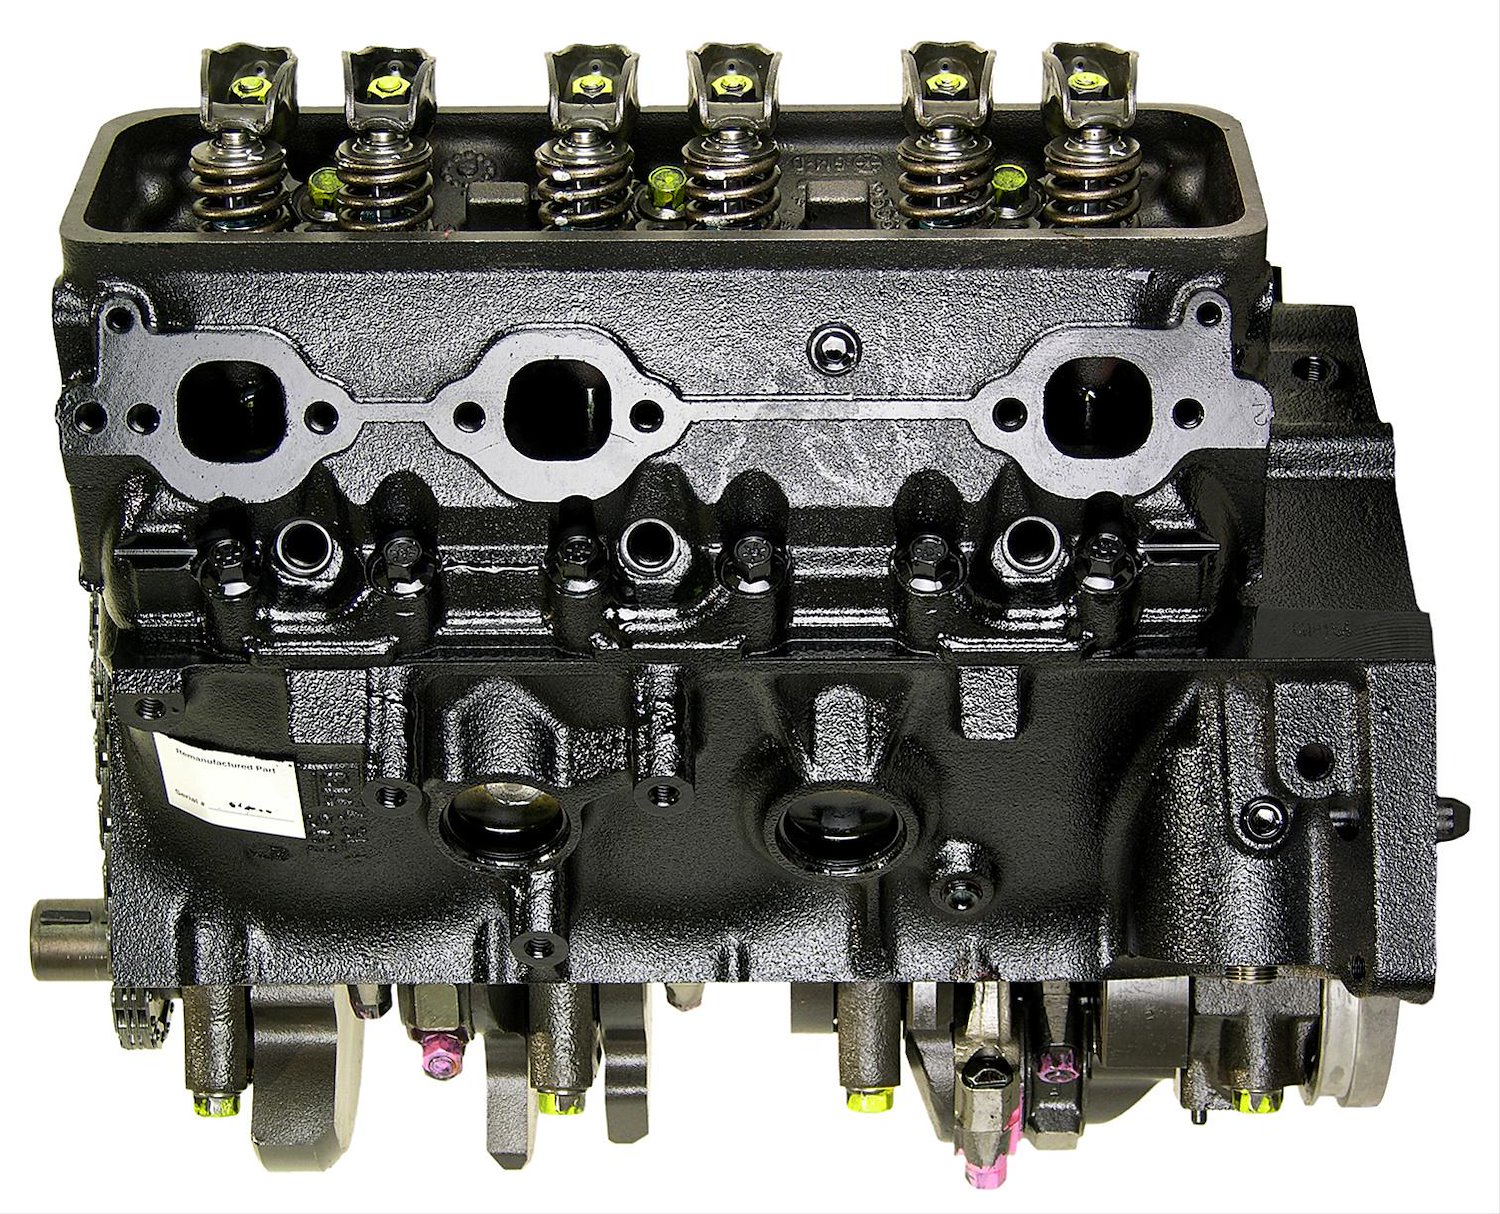 STANDARD ROTATION 175 & 205 HP ROLLER CAM ENGINE WITH BALANCE SHAFT HAS 6 BOLT TIMING COVER AND 10 B